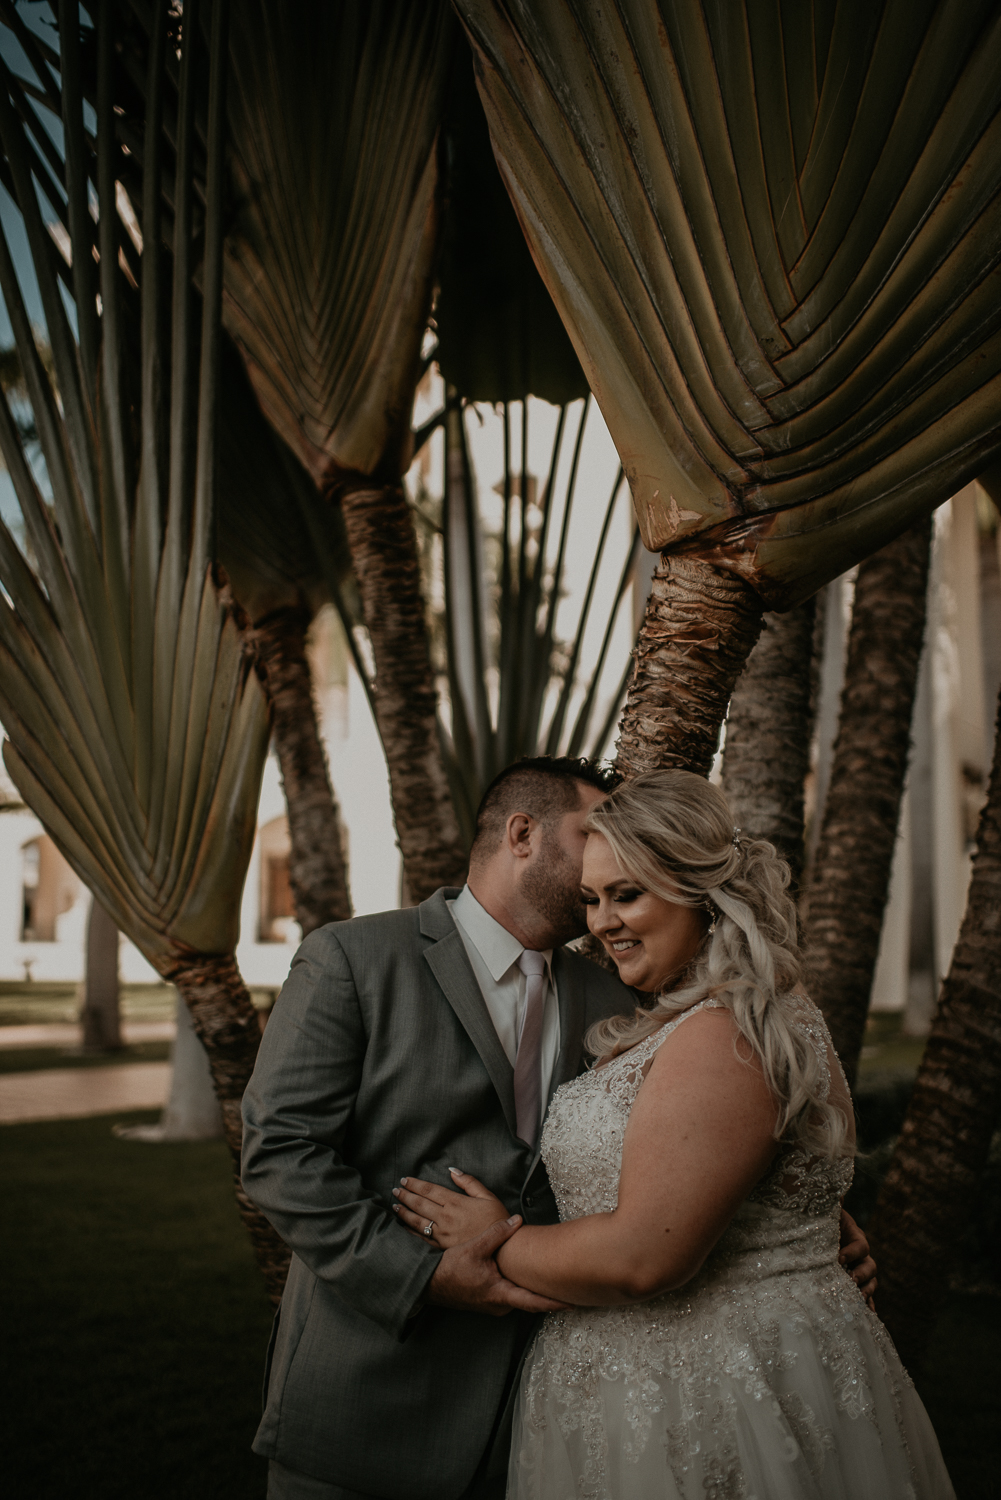 Bride and grooms first looks and private vows